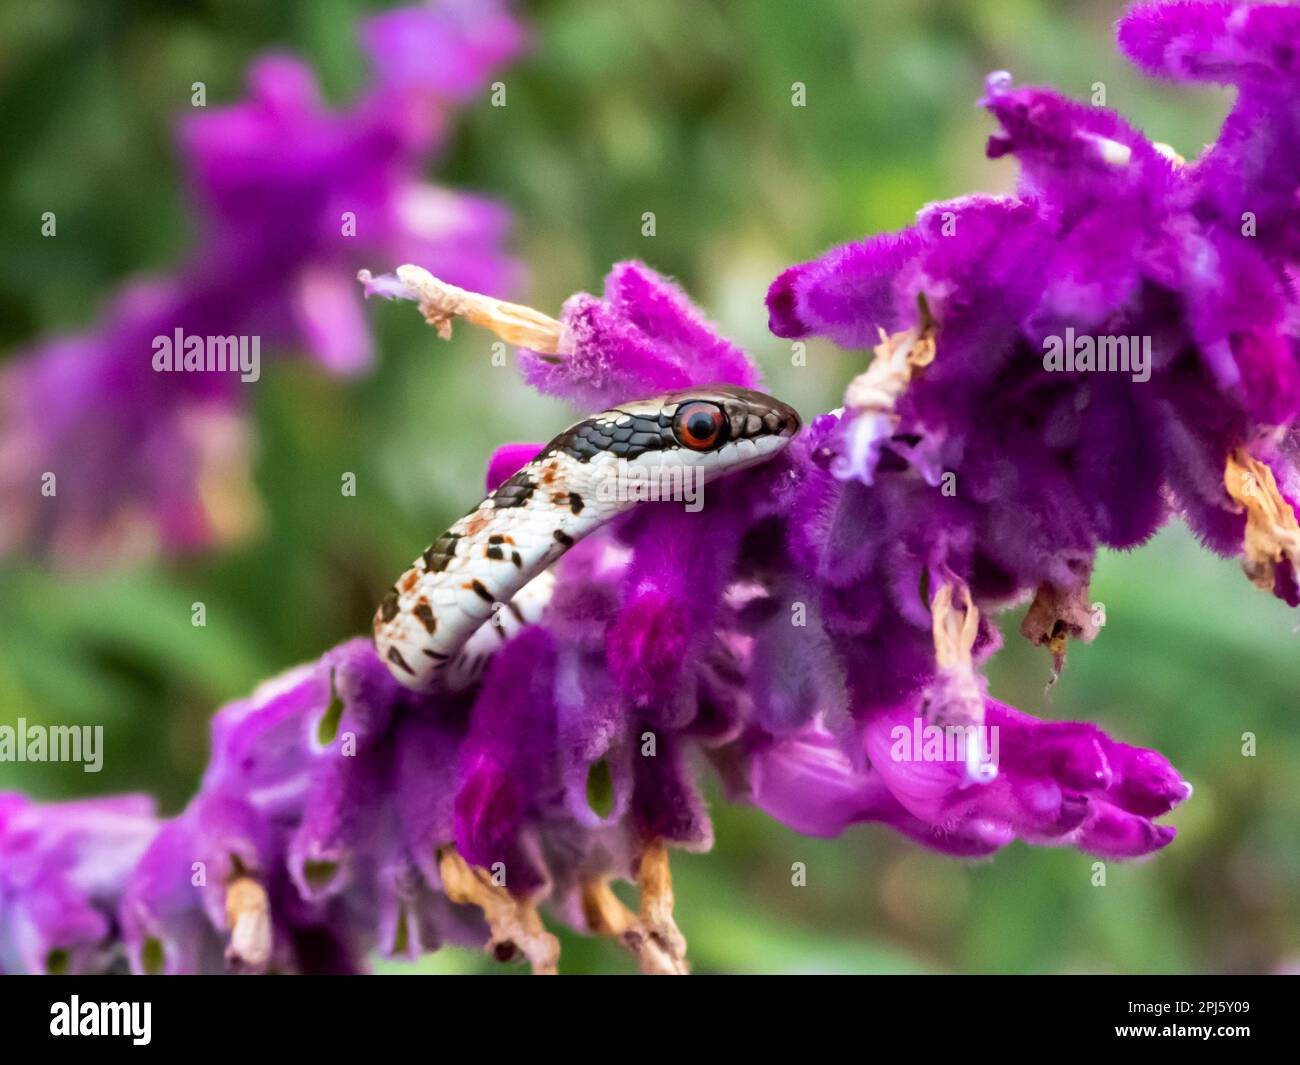 A close-up shot of a snake coiled on a bed of purple flower petals in a natural outdoor Stock Photo